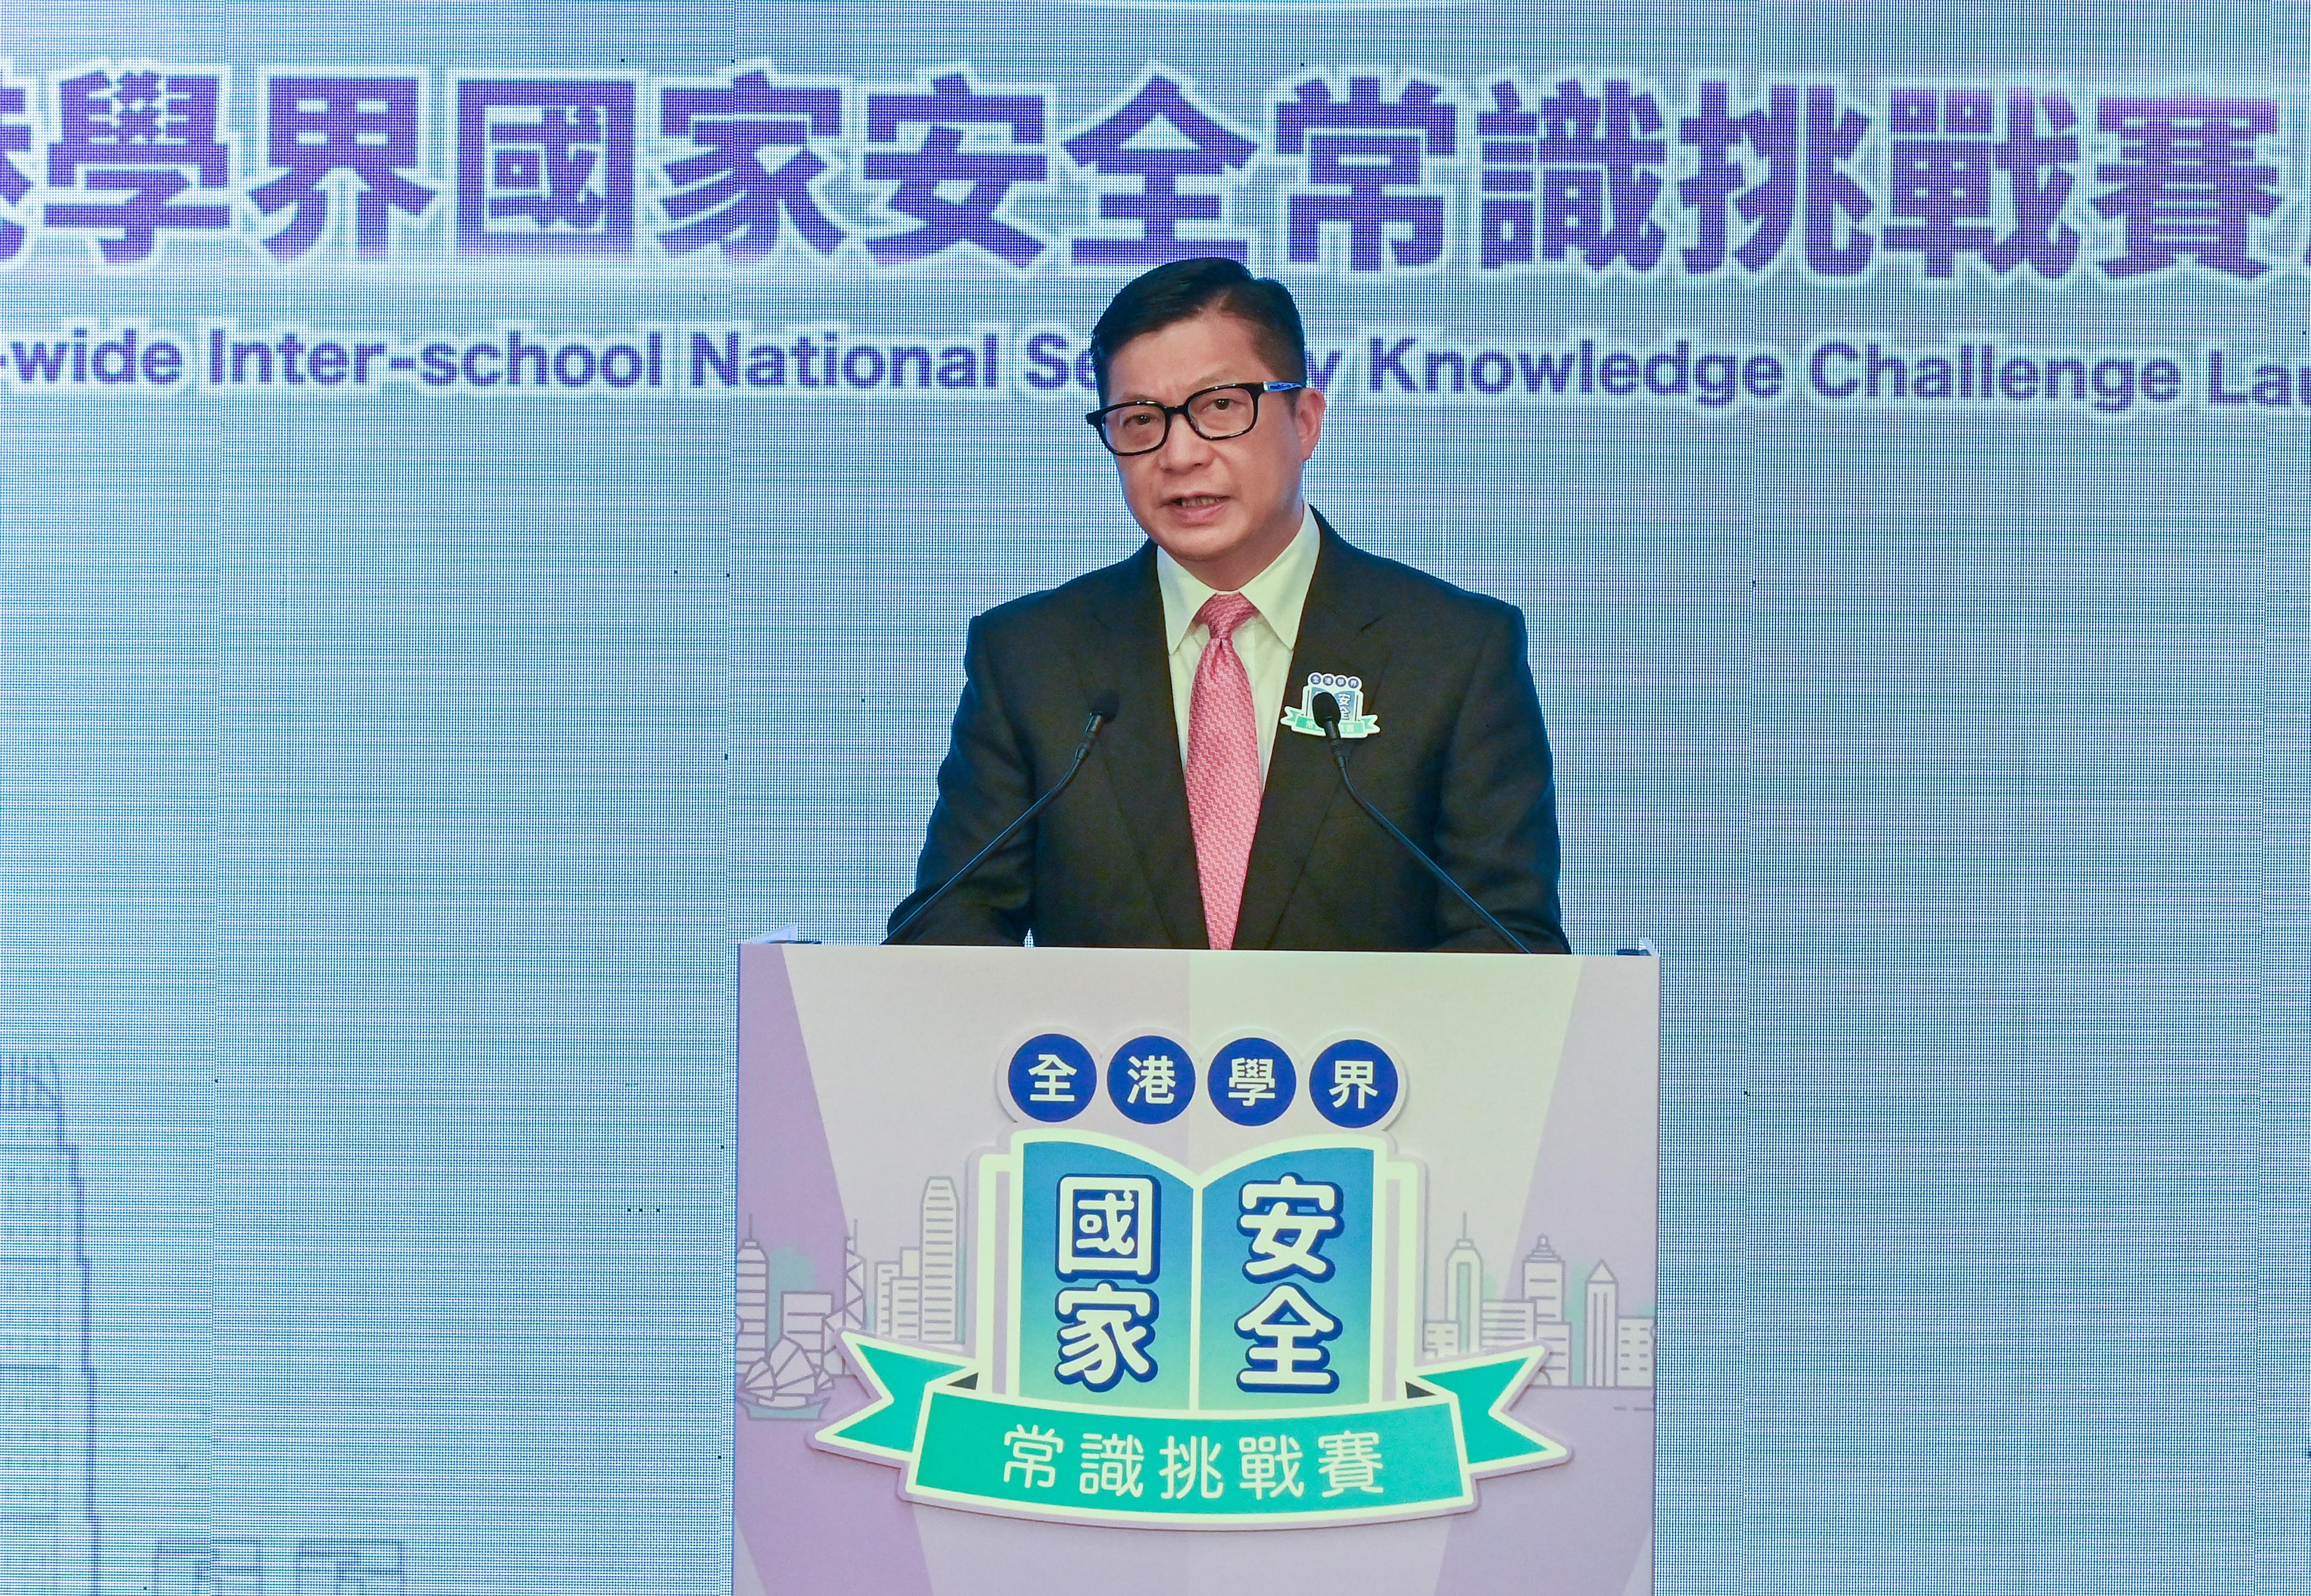 The Department of Justice, the Security Bureau, the Education Bureau and the Hong Kong Shine Tak Foundation jointly organised the Territory-wide Inter-school National Security Knowledge Challenge, and held a launching ceremony at the former French Mission Building today (December 3). Photo shows the Secretary for Security, Mr Tang Ping-keung, addressing the launching ceremony.